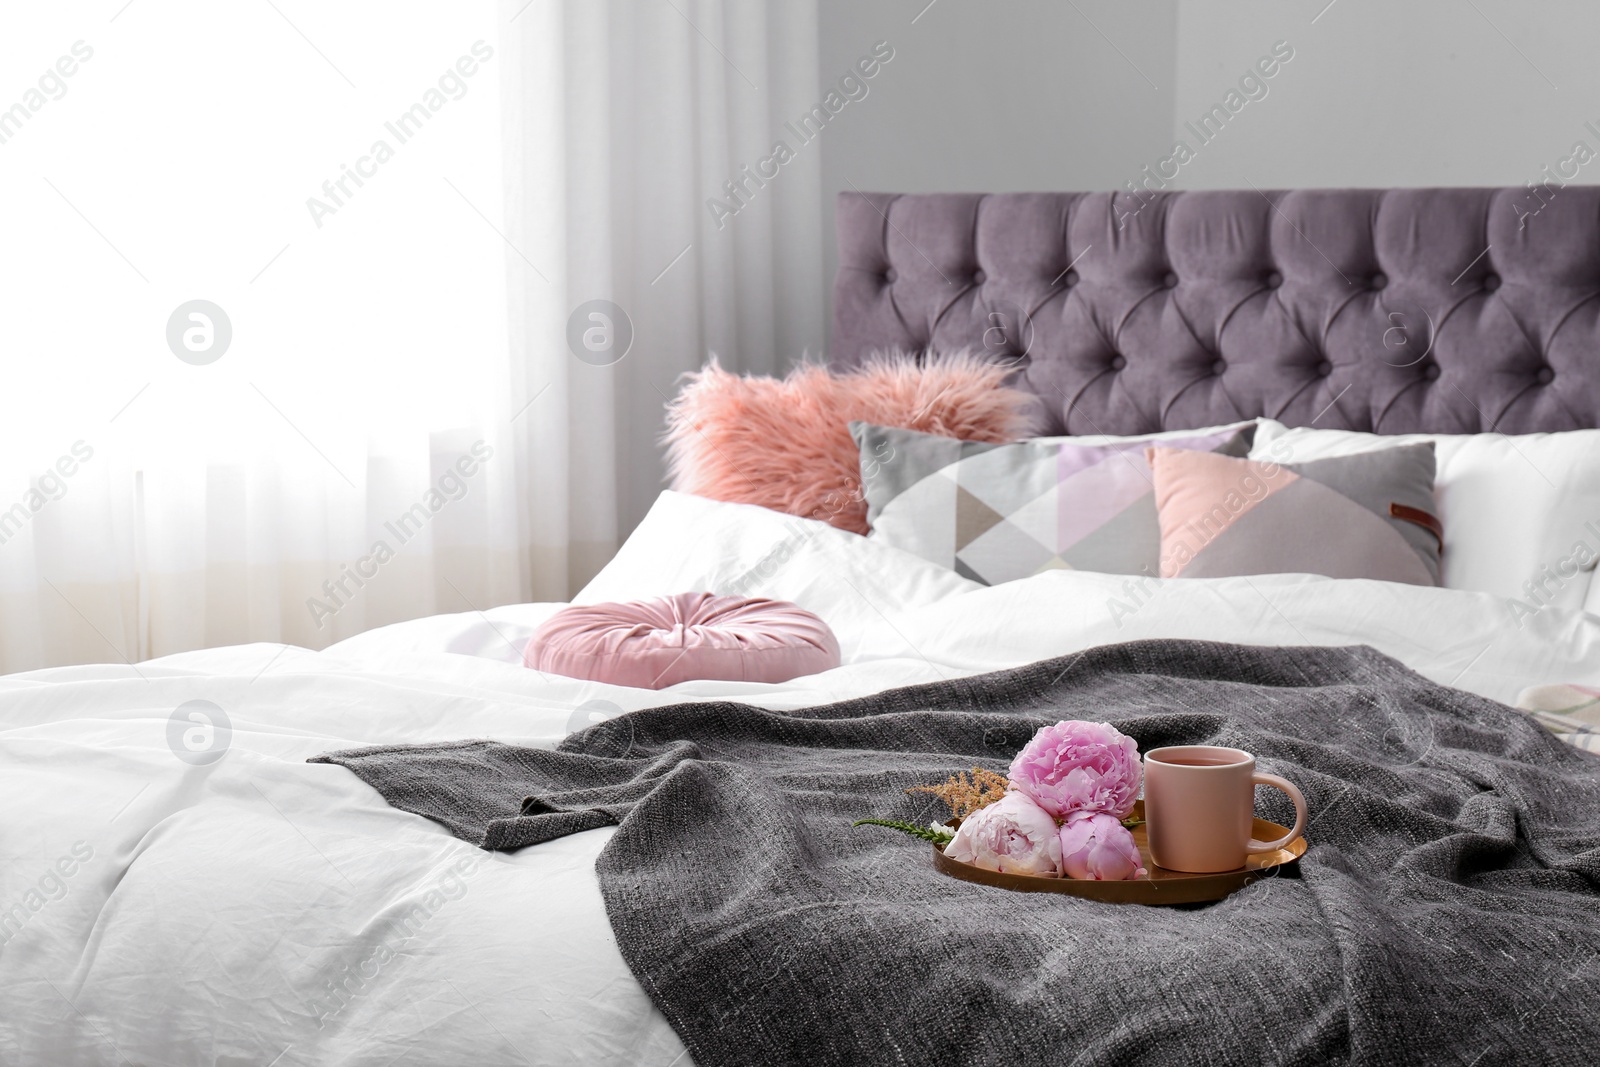 Photo of Cup of drink and bouquet on bed with pillows in room